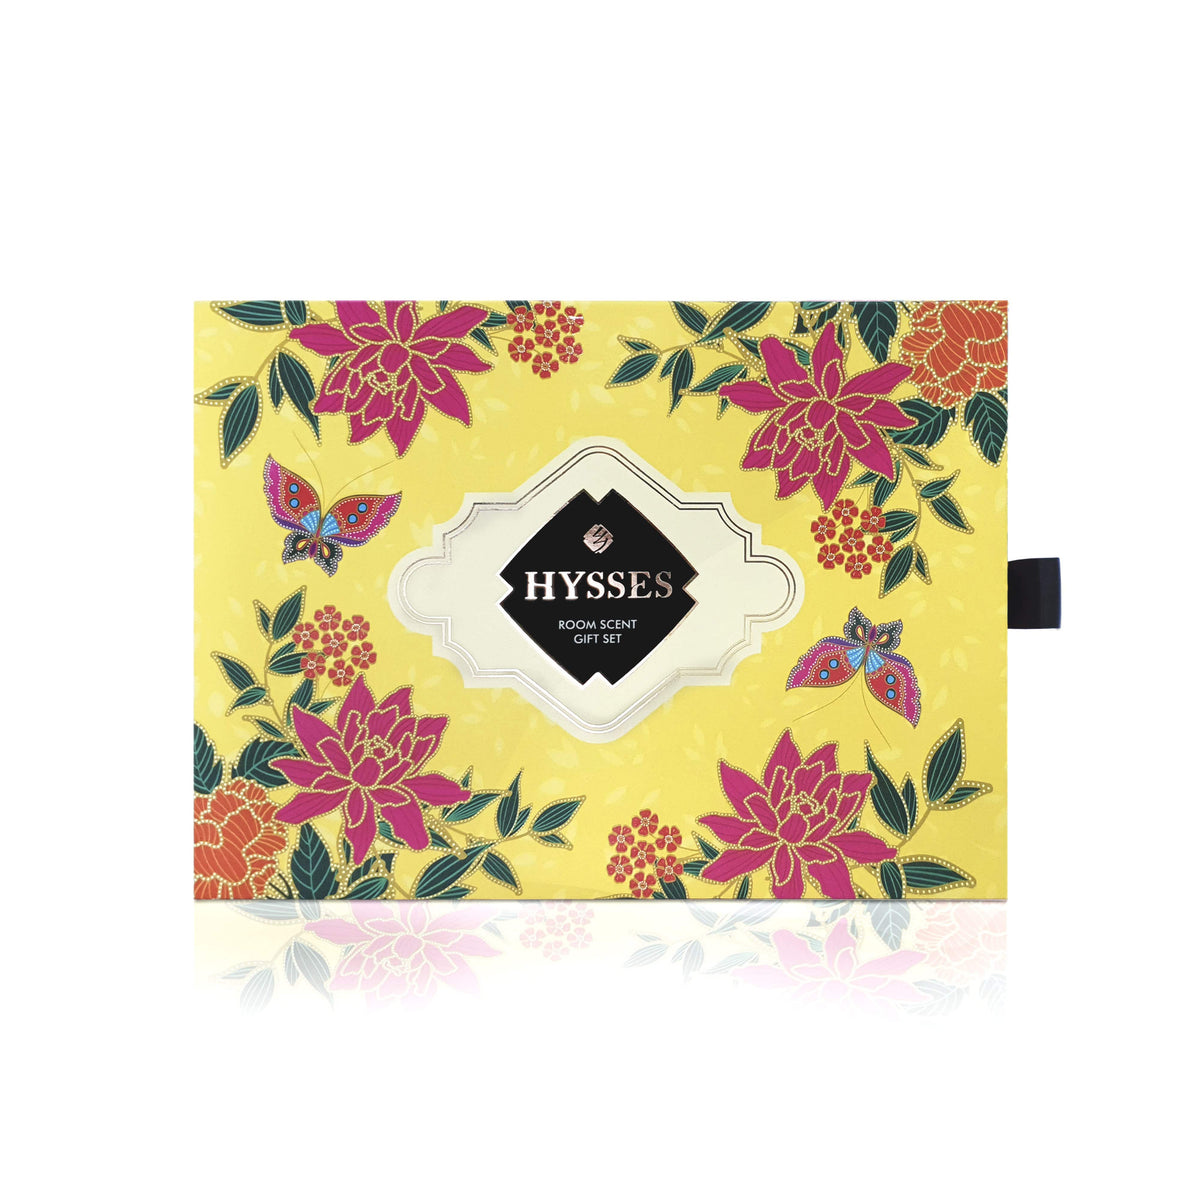 Hysses Home Scents Room Scent Travel Gift Set of 4